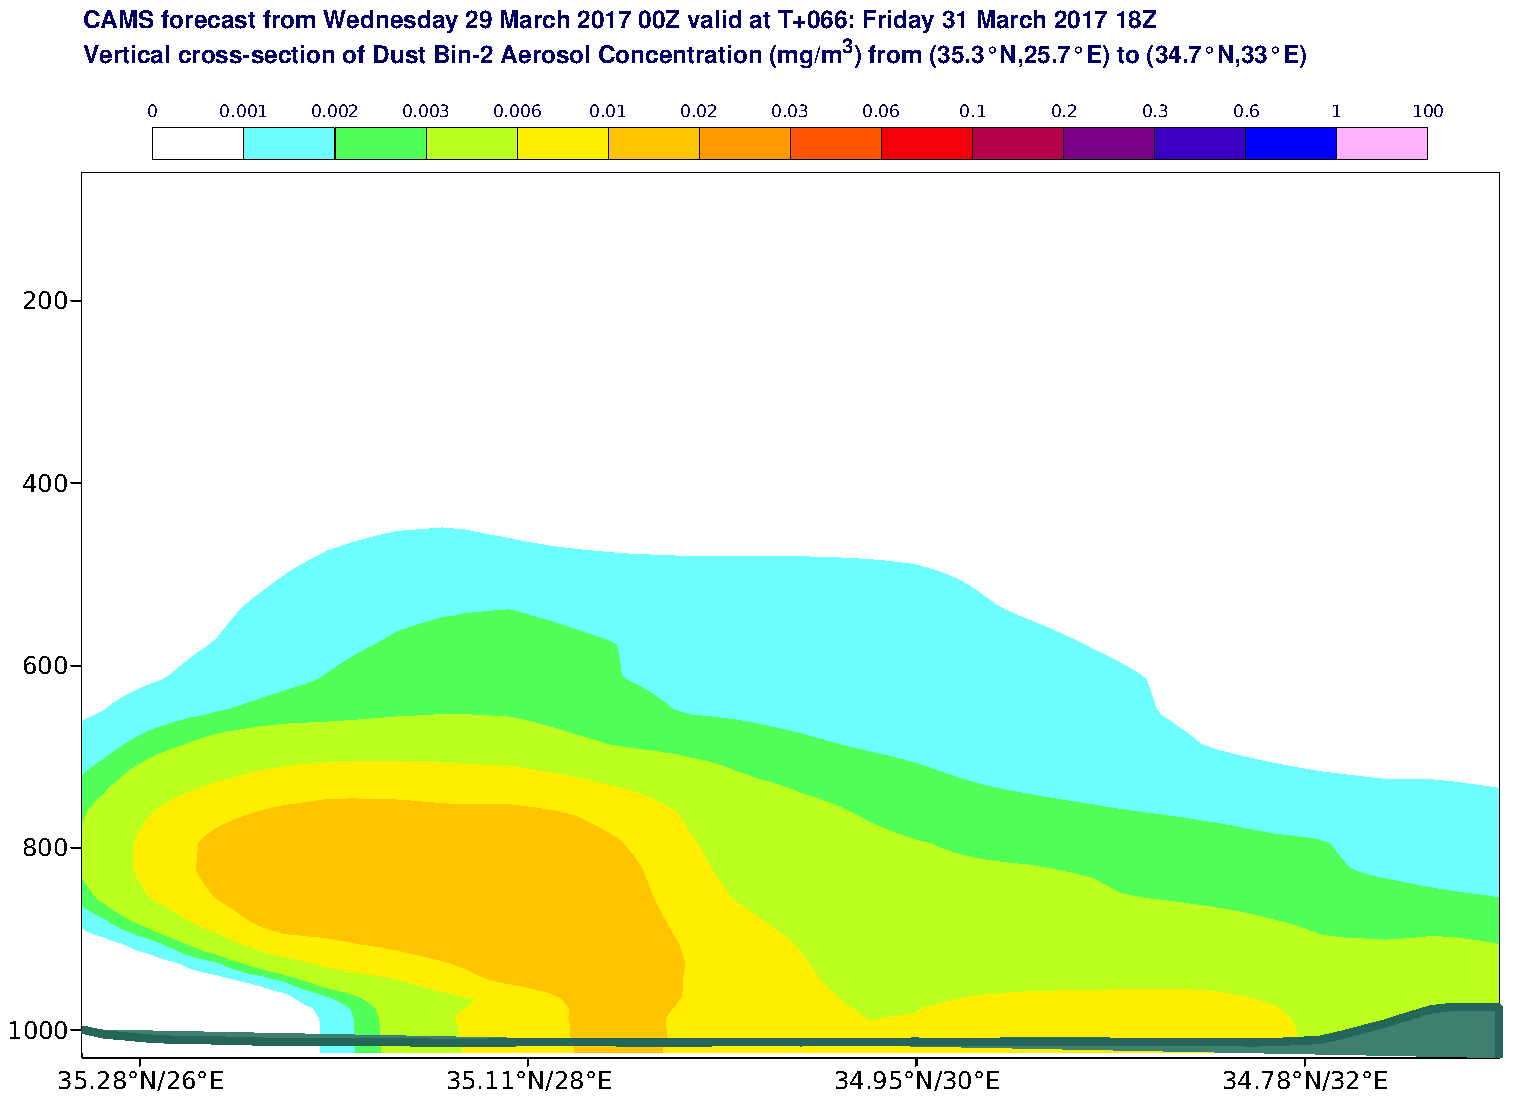 Vertical cross-section of Dust Bin-2 Aerosol Concentration (mg/m3) valid at T66 - 2017-03-31 18:00